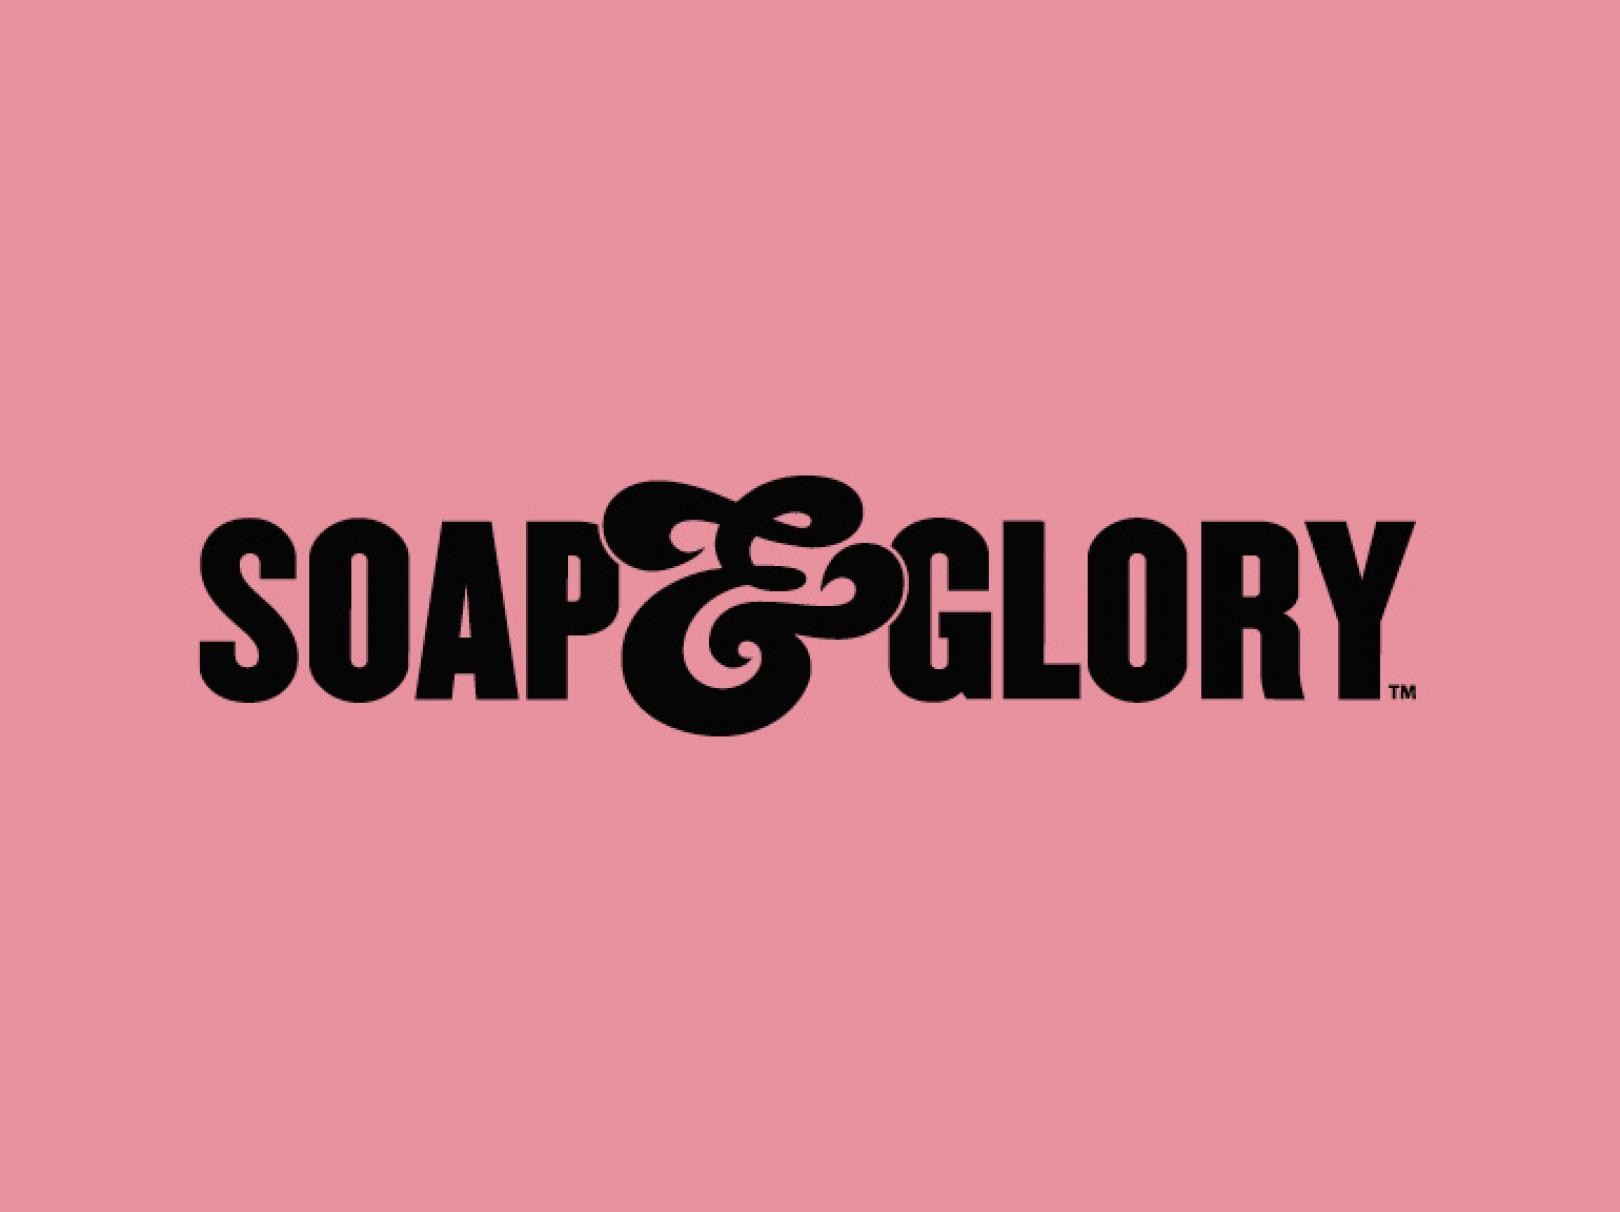 Black Soap and Glory Logo on Pink Background